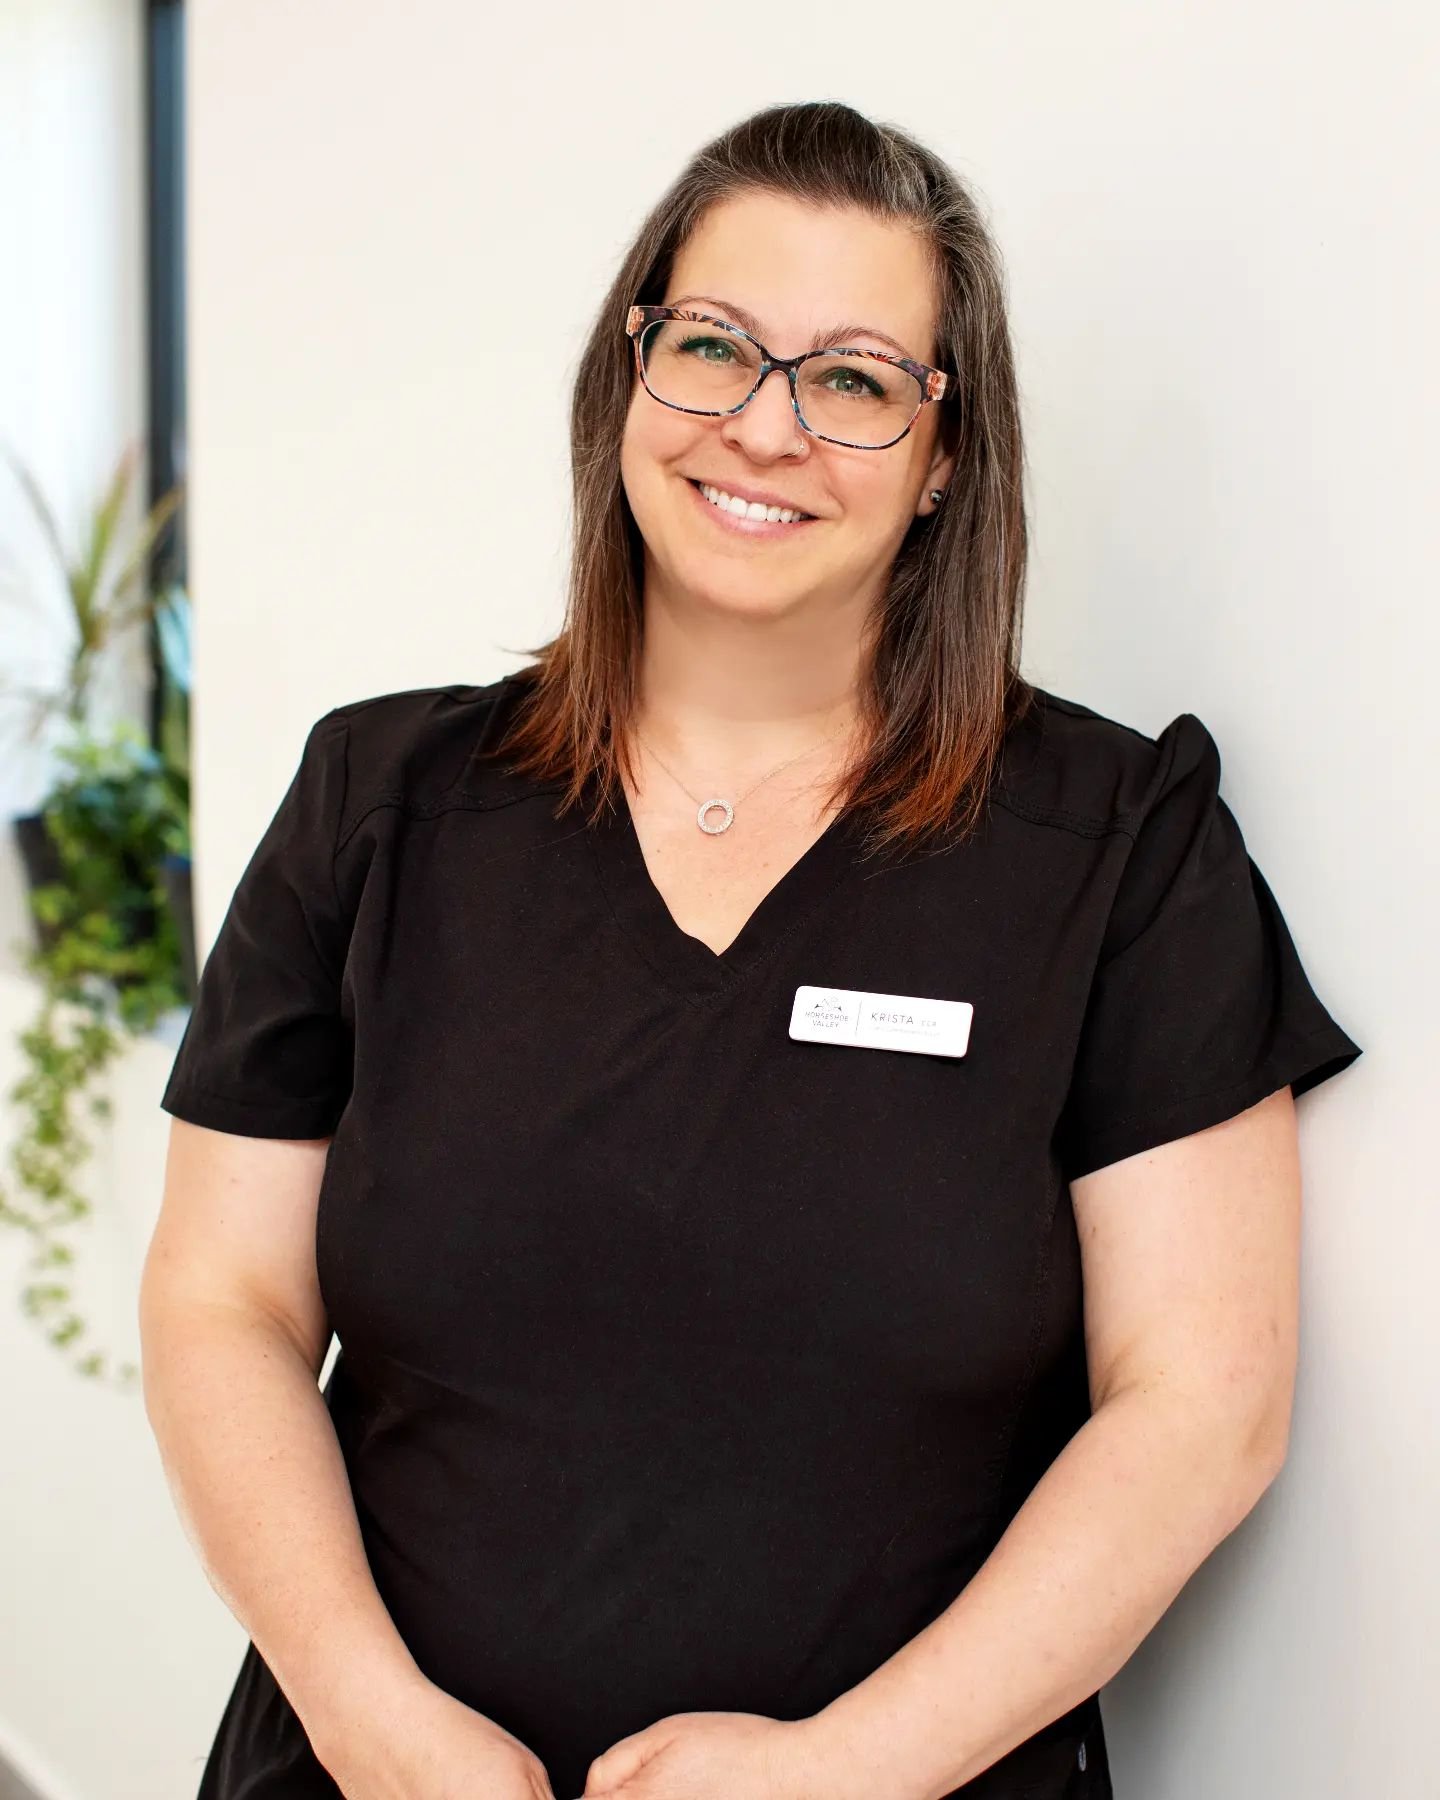 April 21st - April 27th is Veterinary Receptionist Week, so let's take the time to show some appreciation for Krista! 99.9% of the time her smiling face is the first you see when you walk in the door, or the first person you hear when you call. (She 